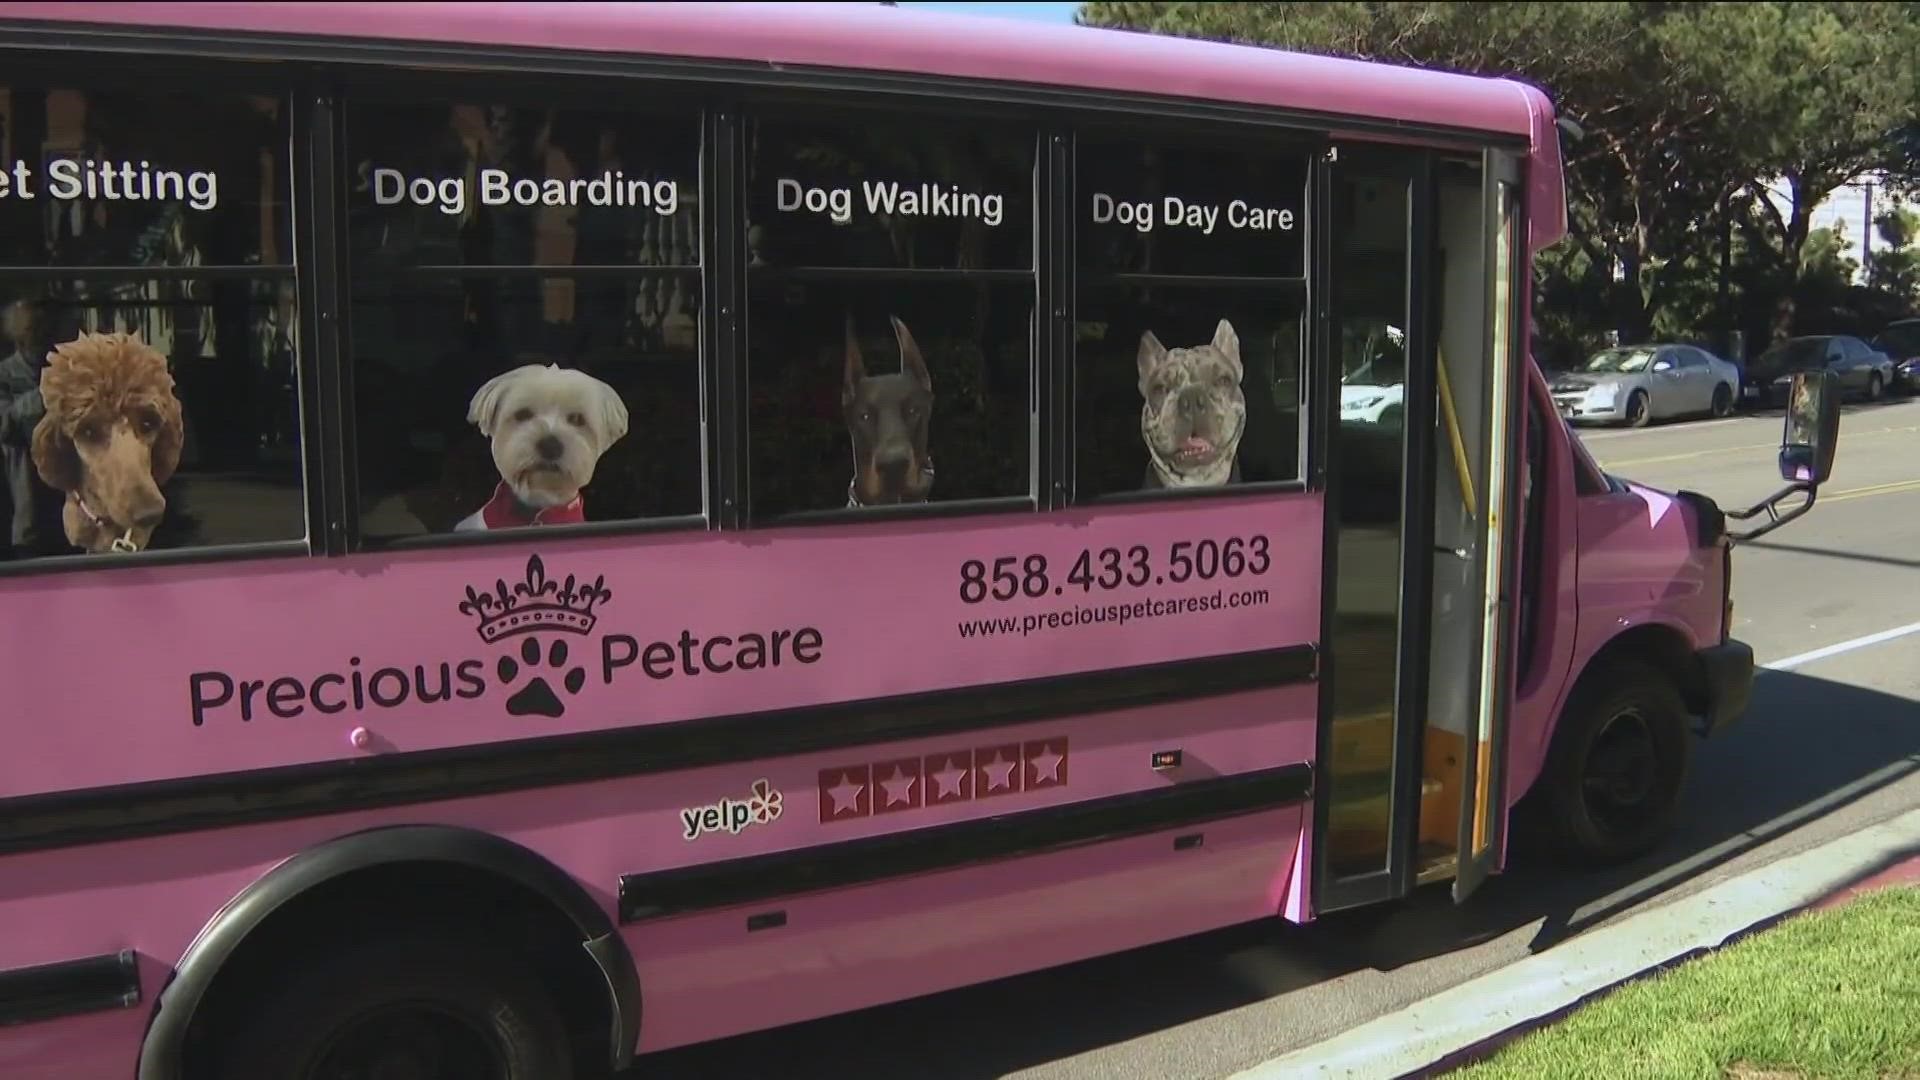 Instead of leaving your dog at home all day while you go to work, you might consider sending your pet on a pink party bus with Precious Petcare San Diego.